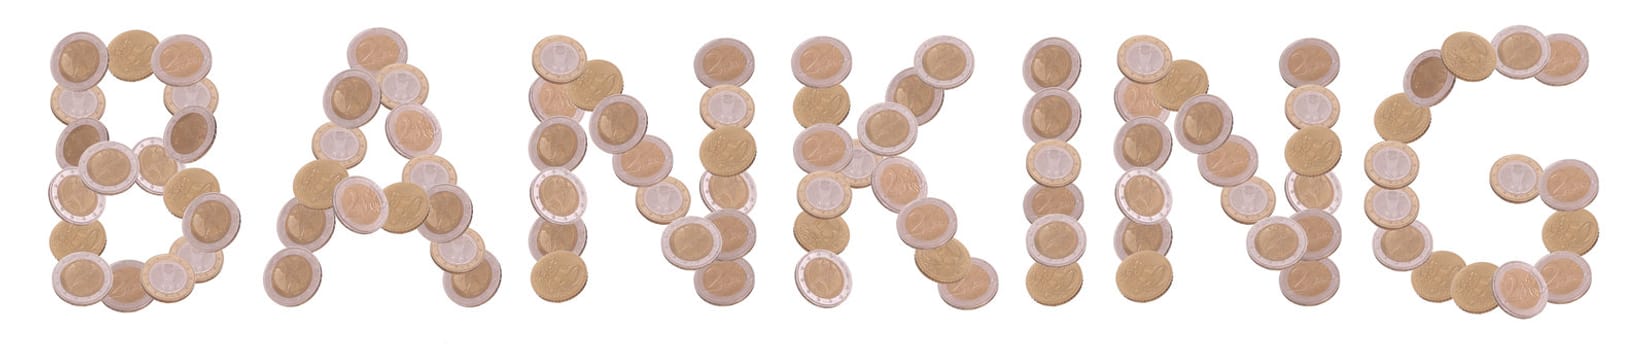 banking - written with coins on white background